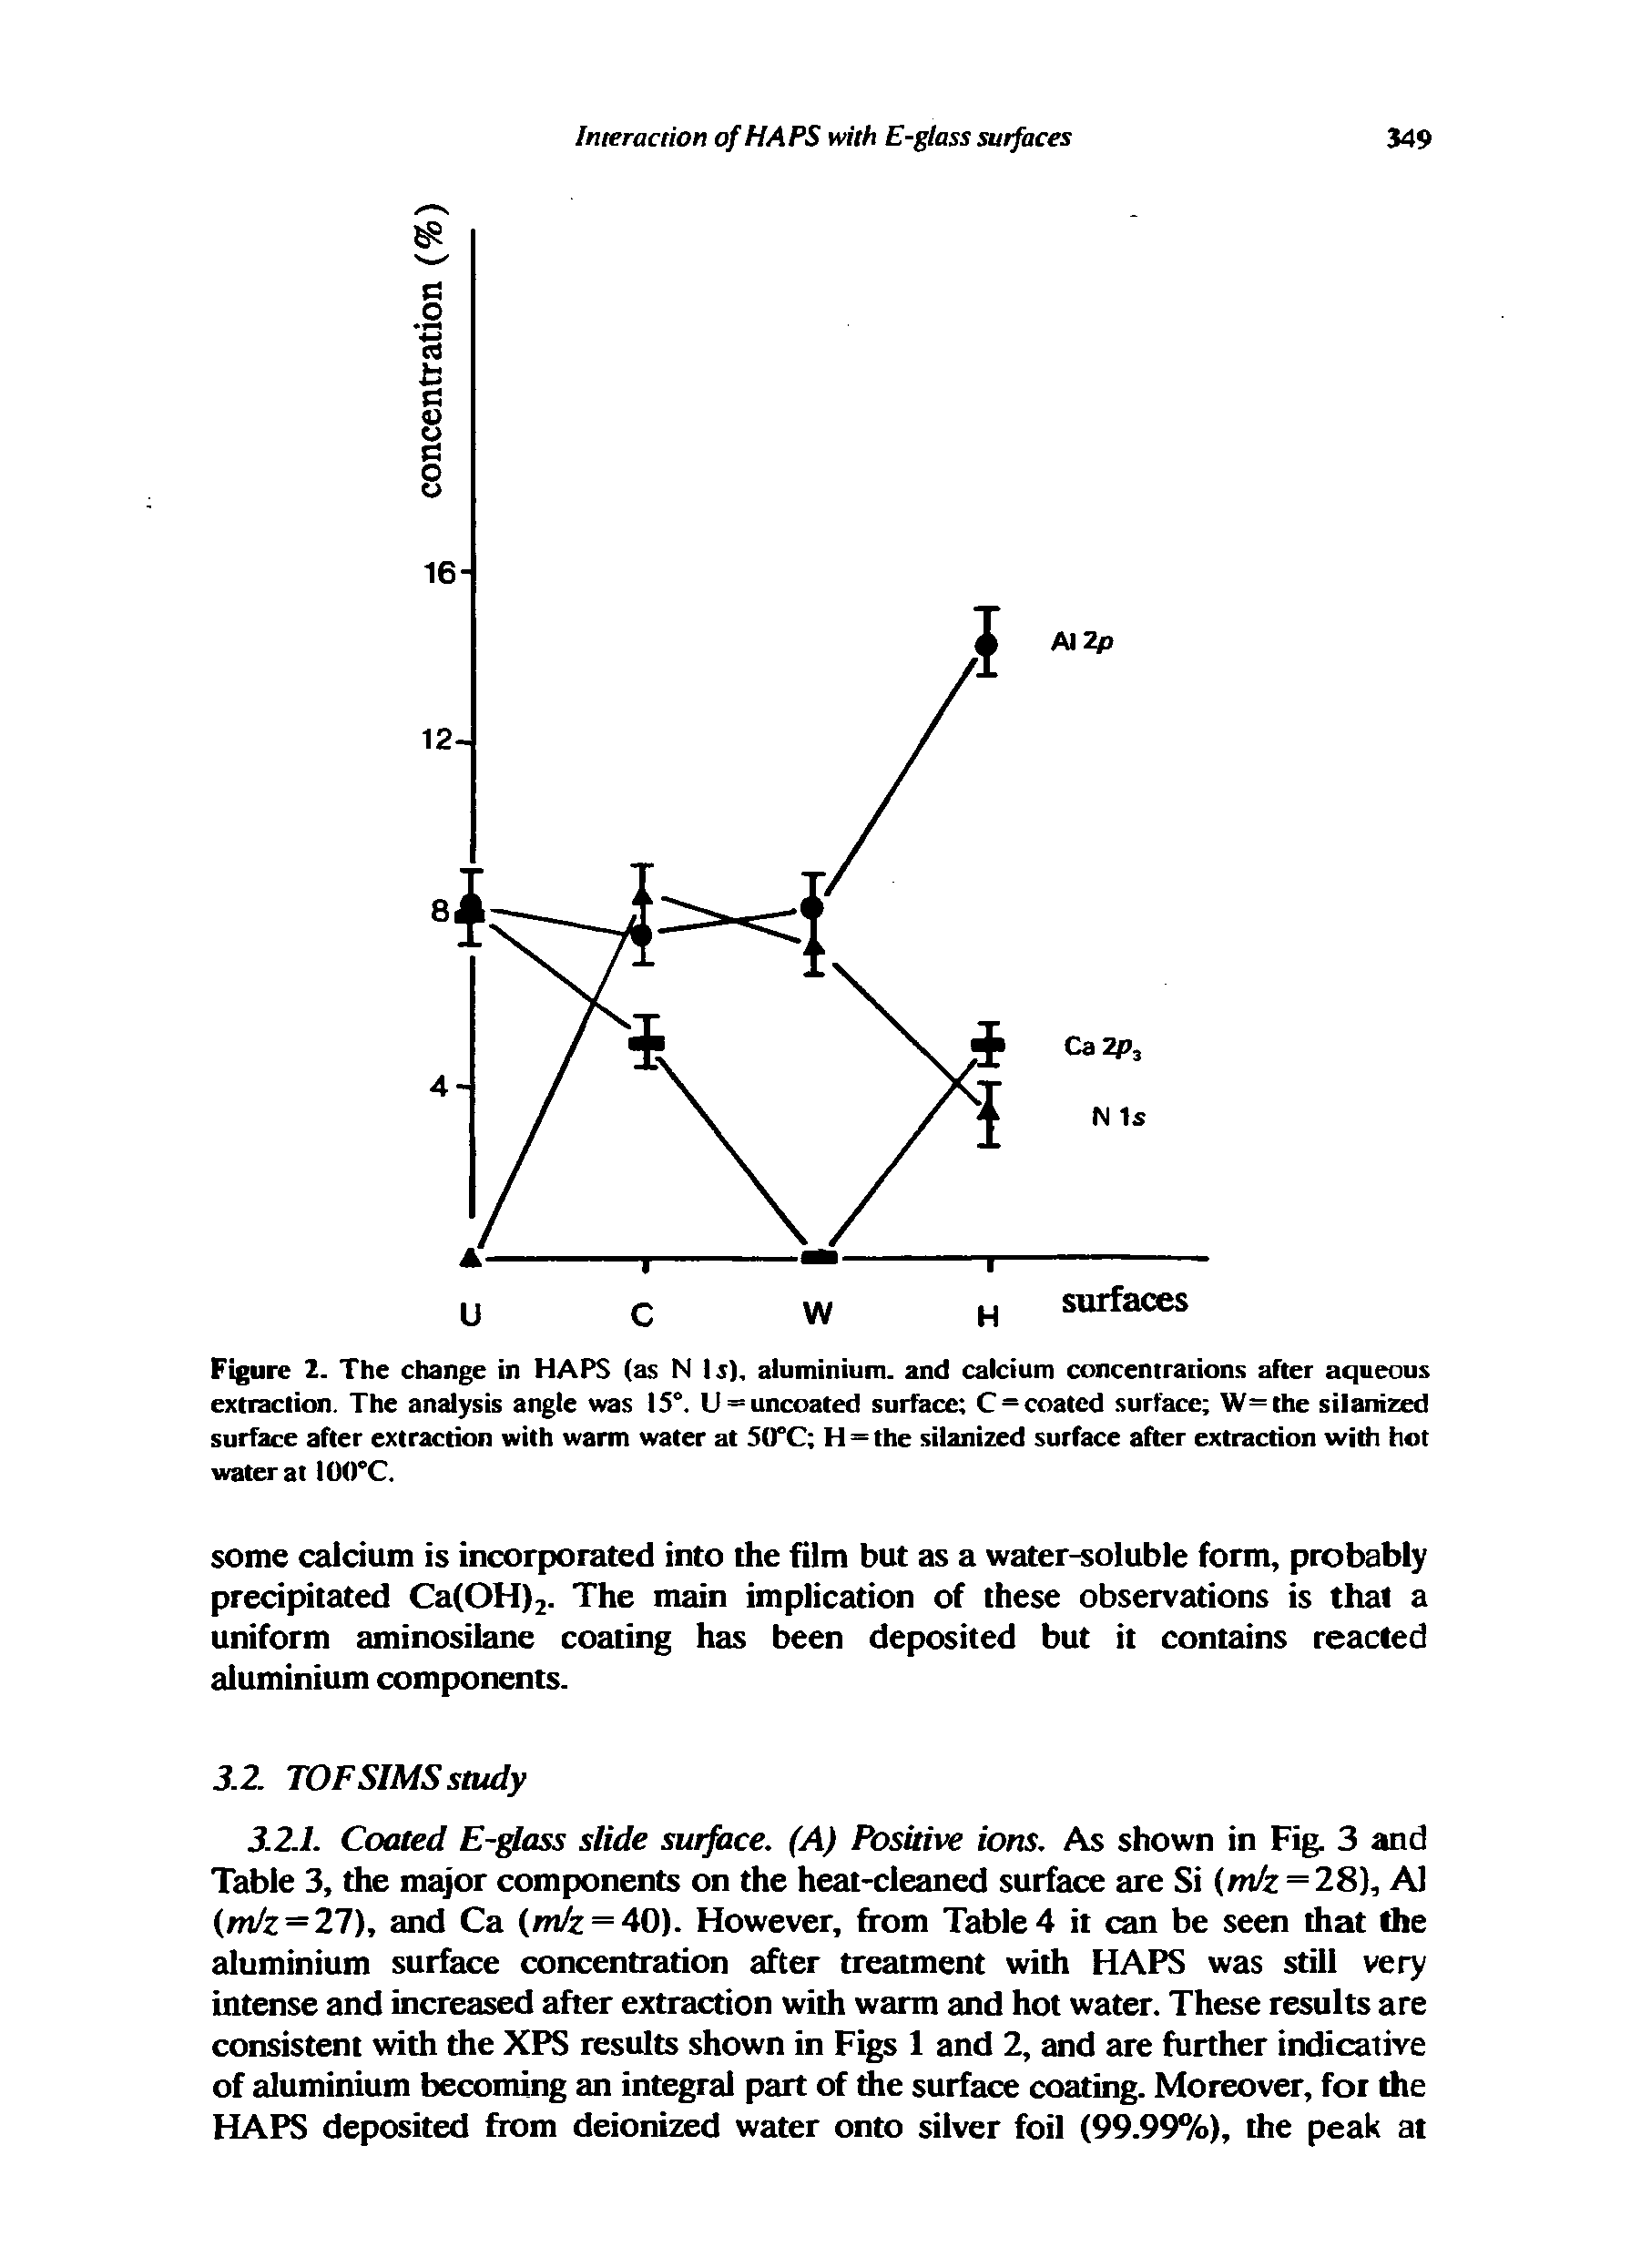 Figure 2. The change in HAPS (as N Is), aluminium, and calcium concentrations after aqueous extraction. The analysis angle was 15°. U = uncoated surface C = coated surface W= the silanized surface after extraction with warm water at 50°C H = the silanized surface after extraction with hot water at IGO°C.